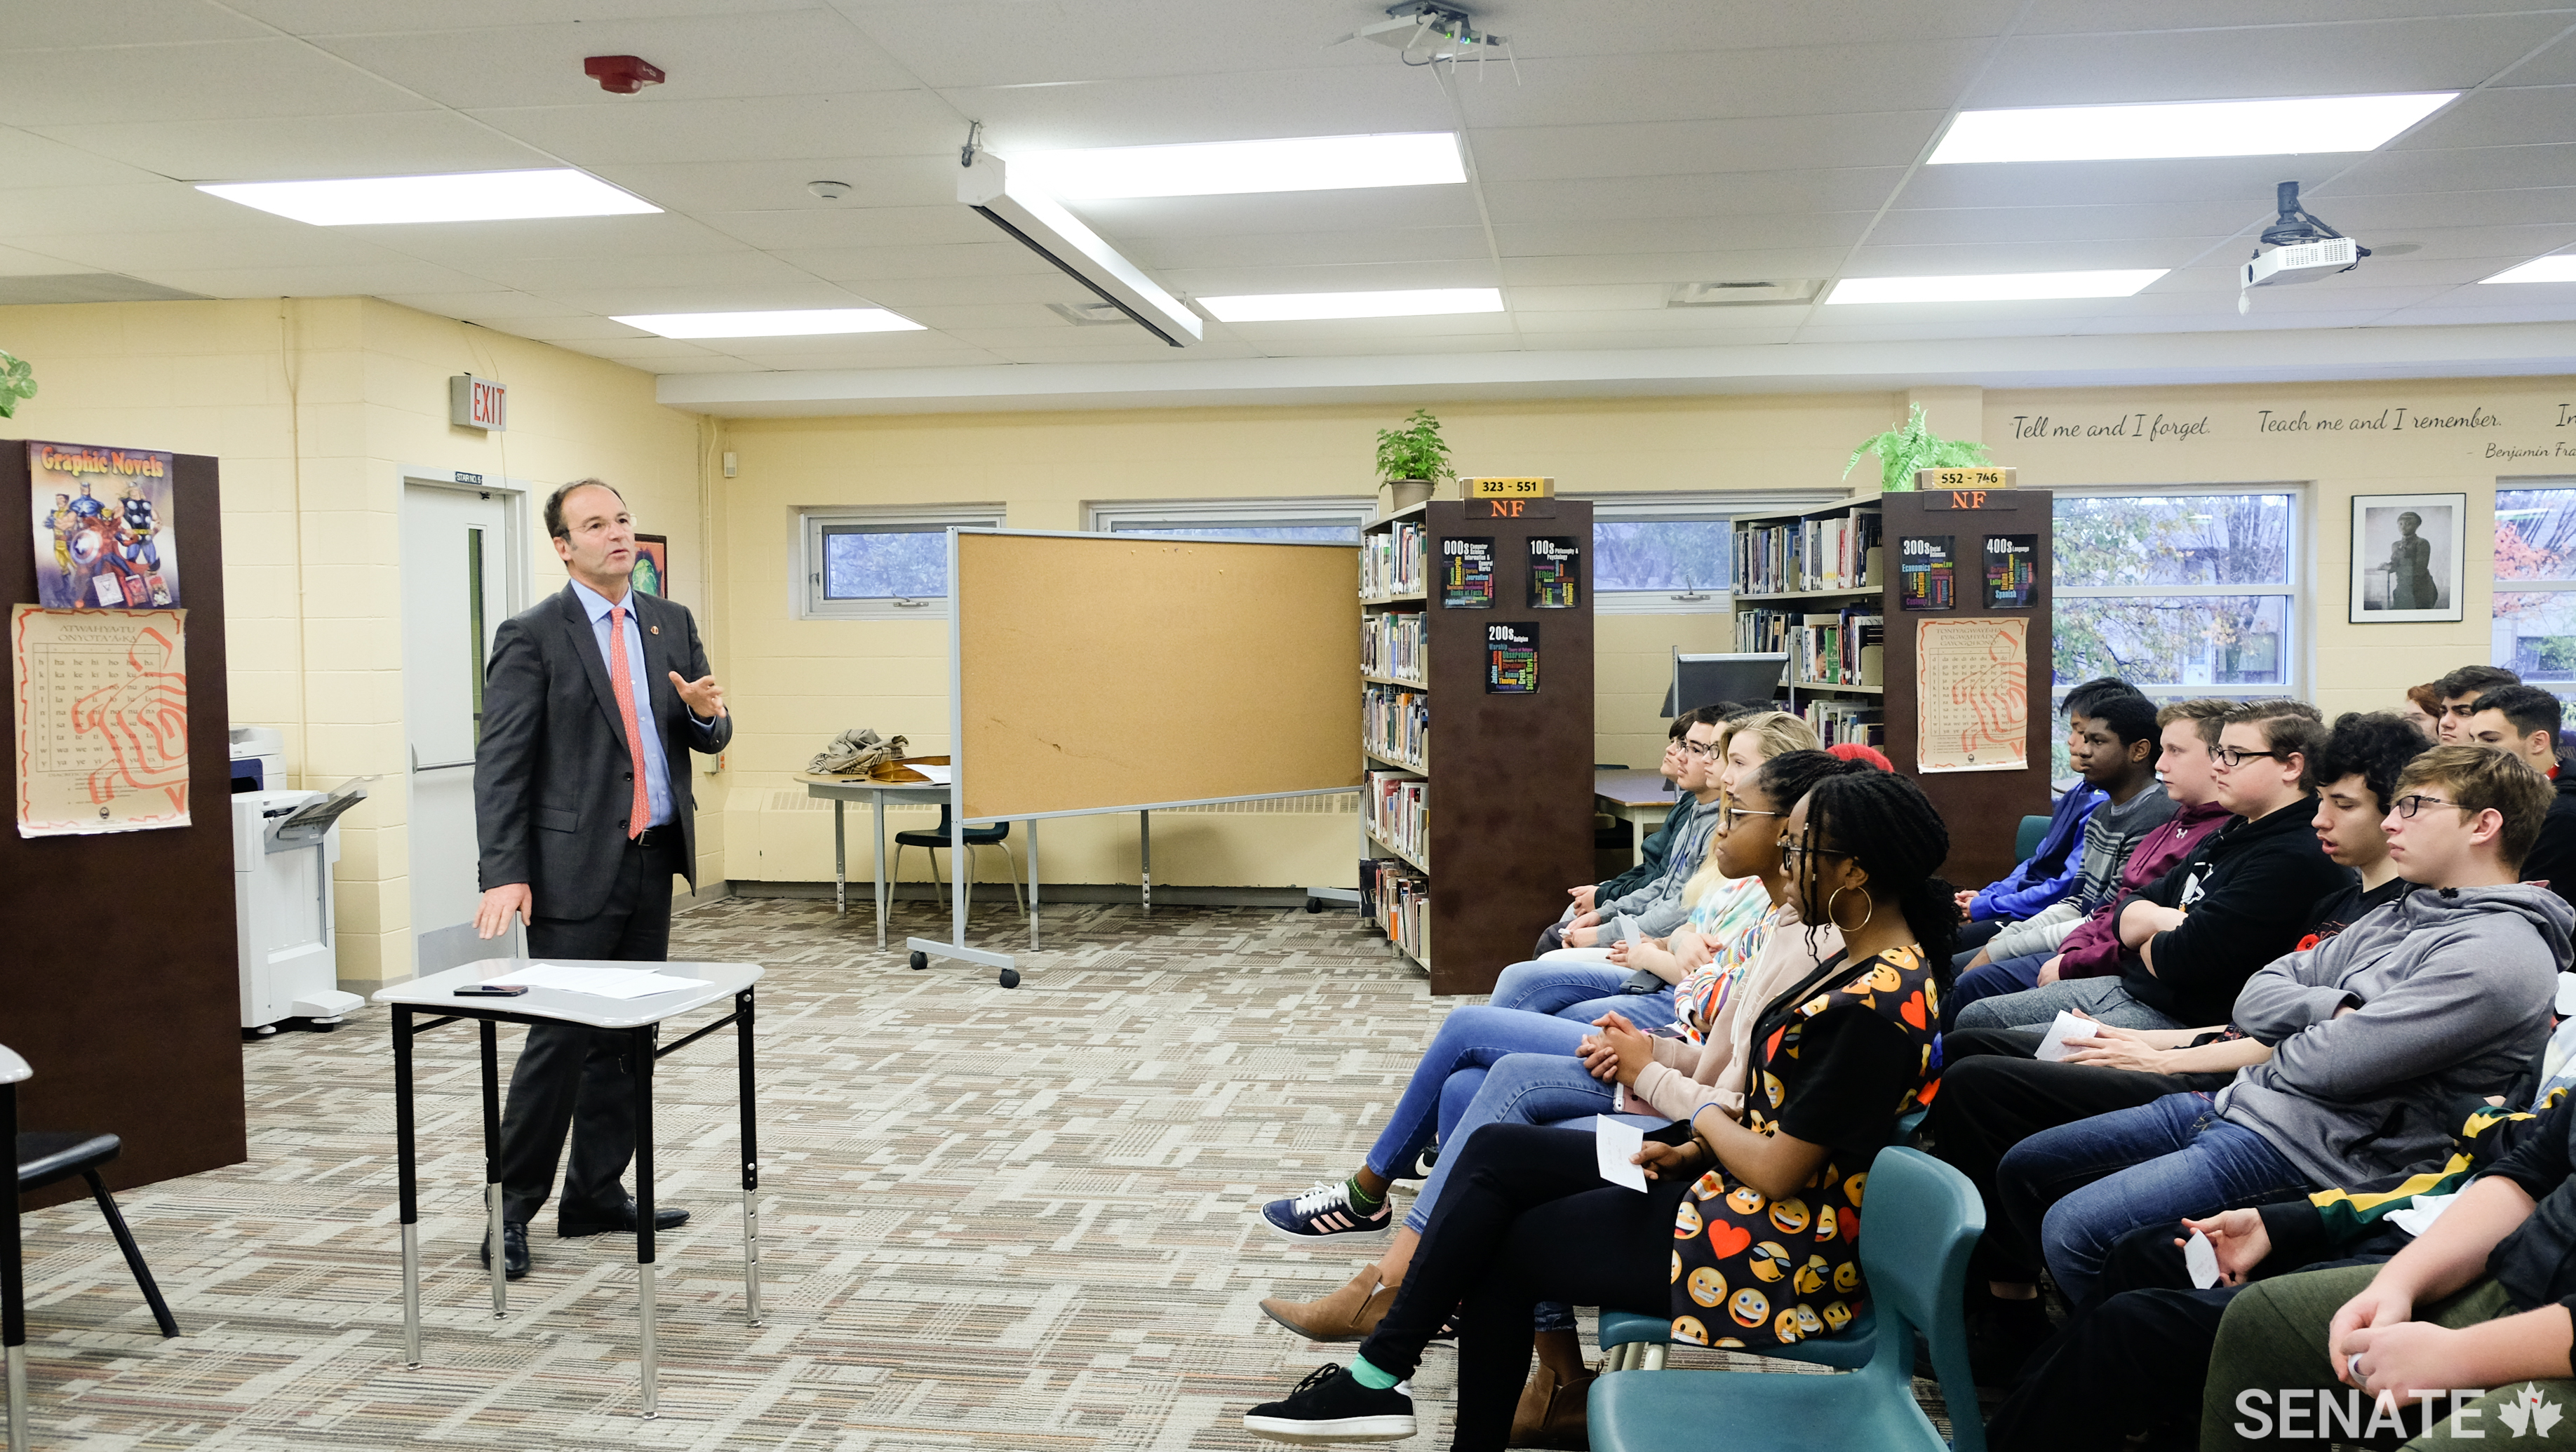 Senator Gold meets with students of Ottawa’s Lester B. Pearson Catholic High School to talk about the work of senators and the importance of giving back to one’s community.